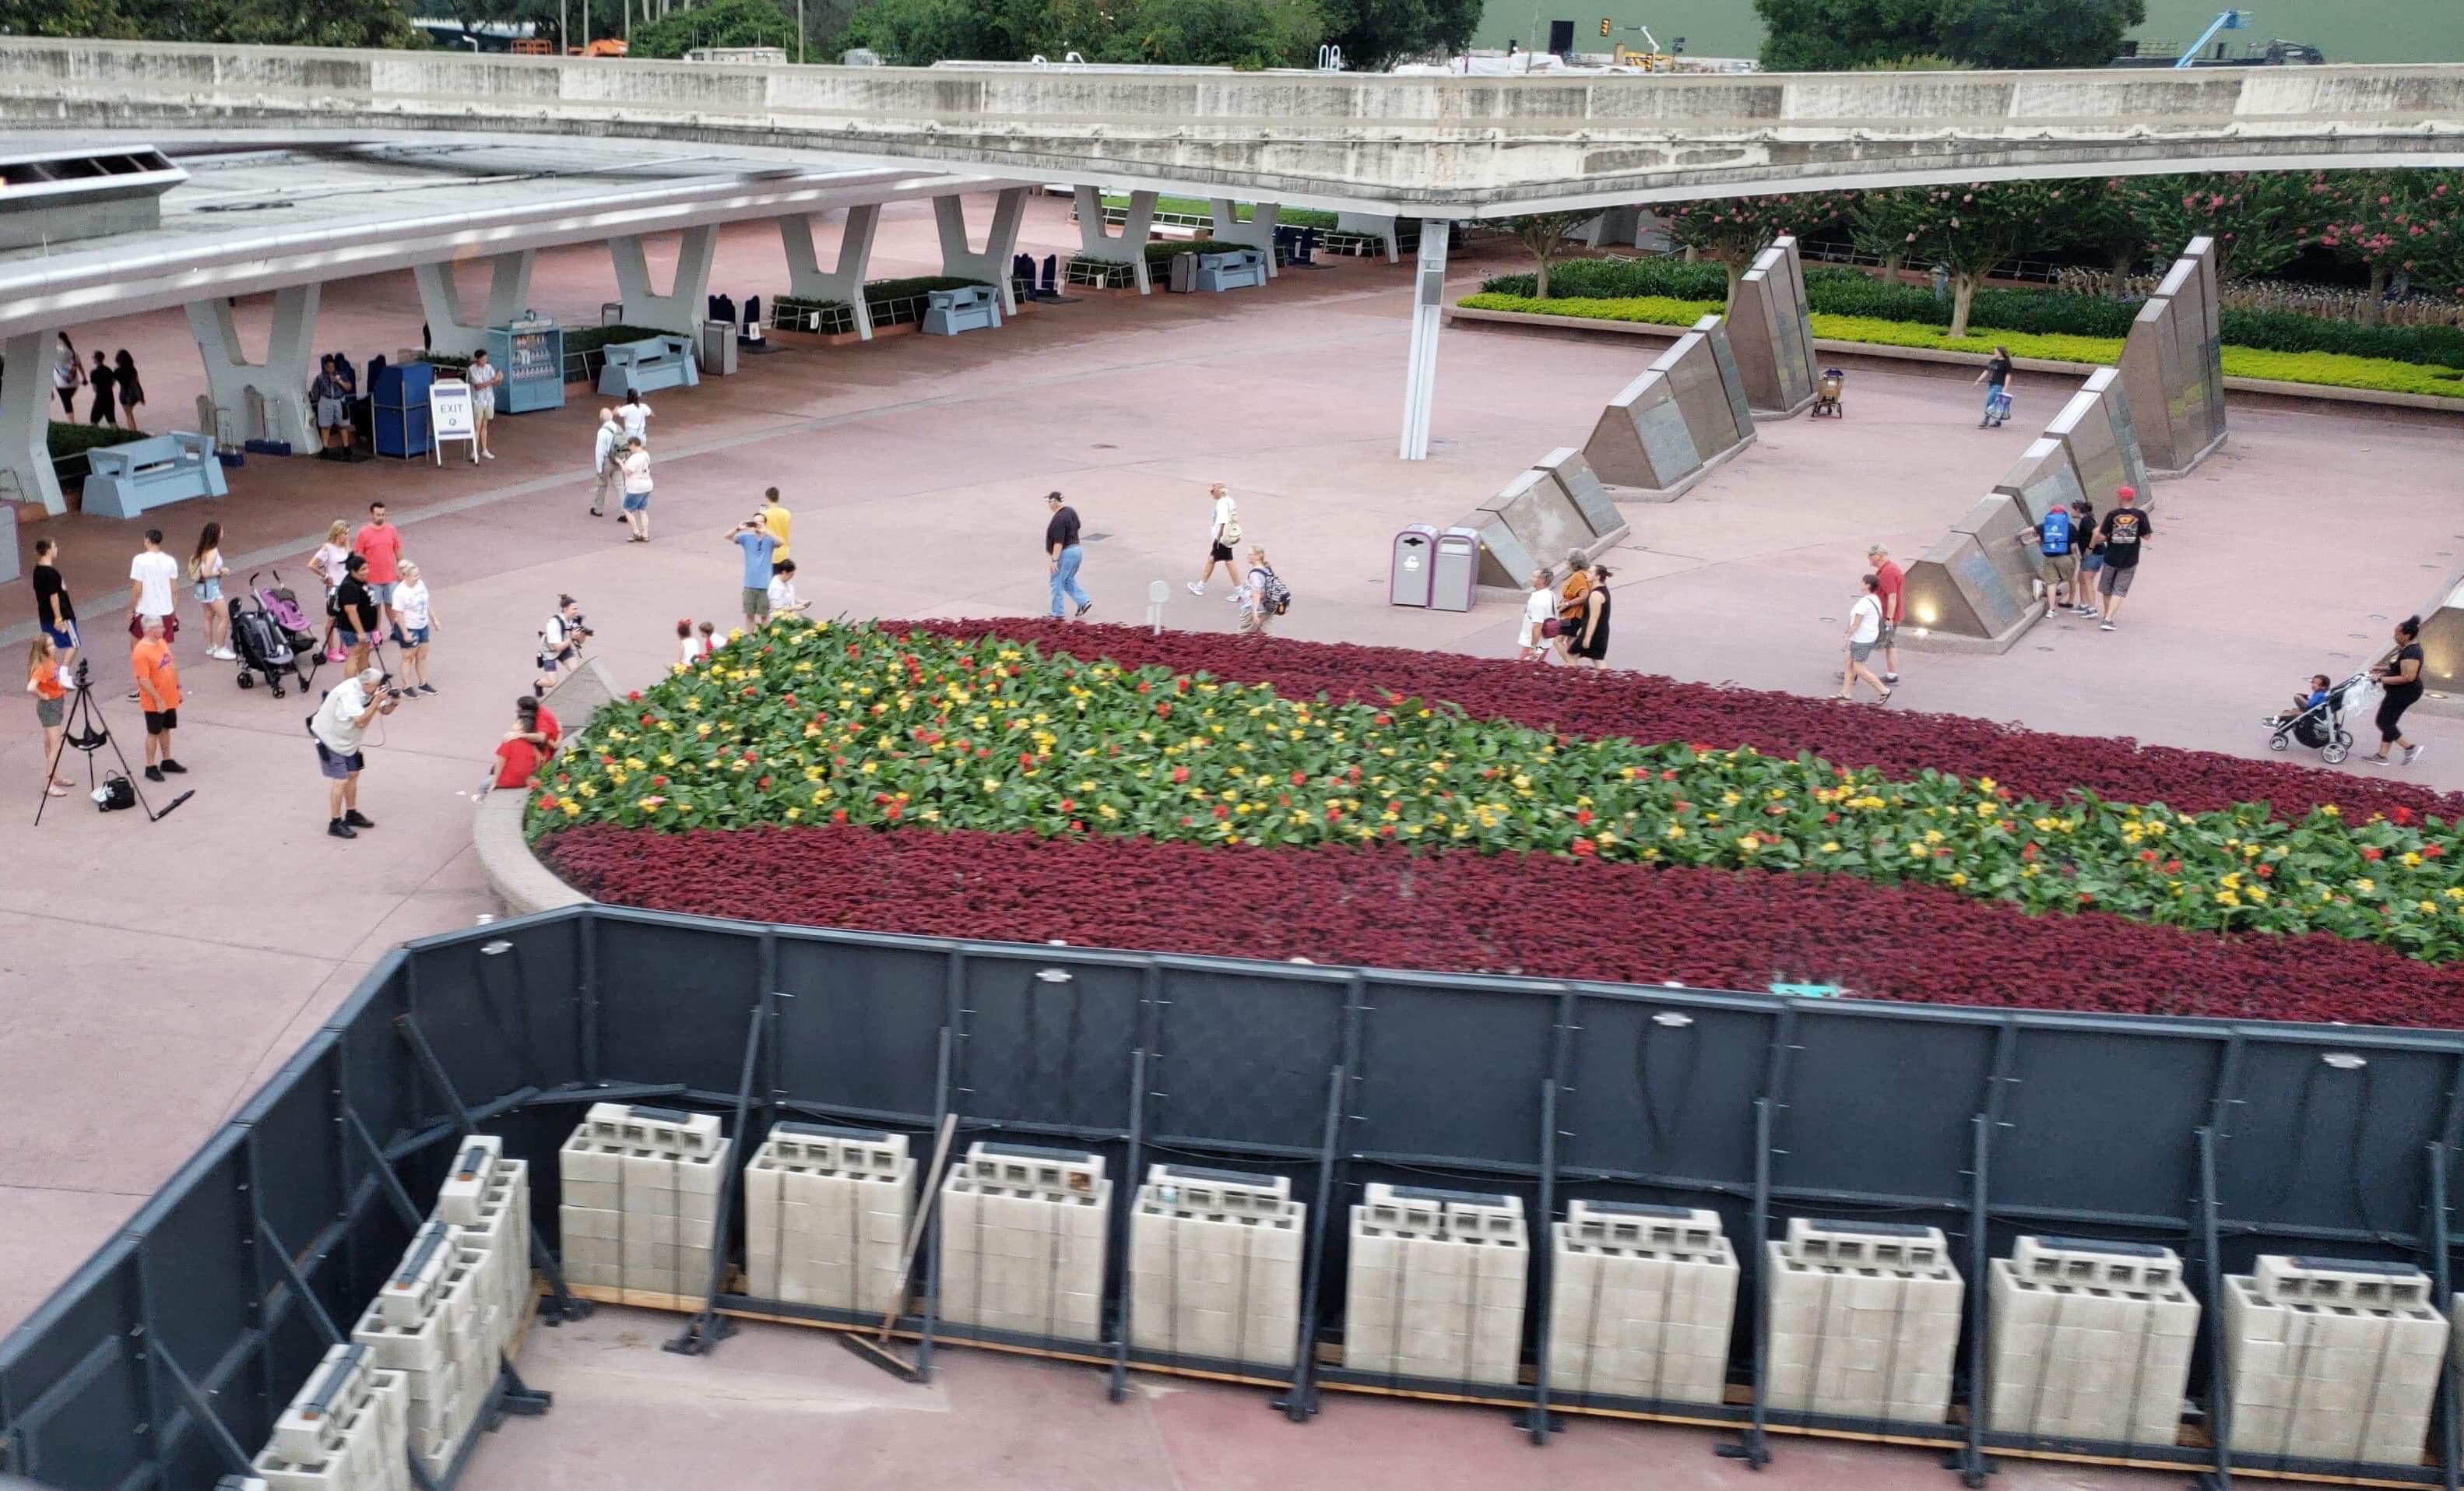 Leave a Legacy Removal Underway at Epcot